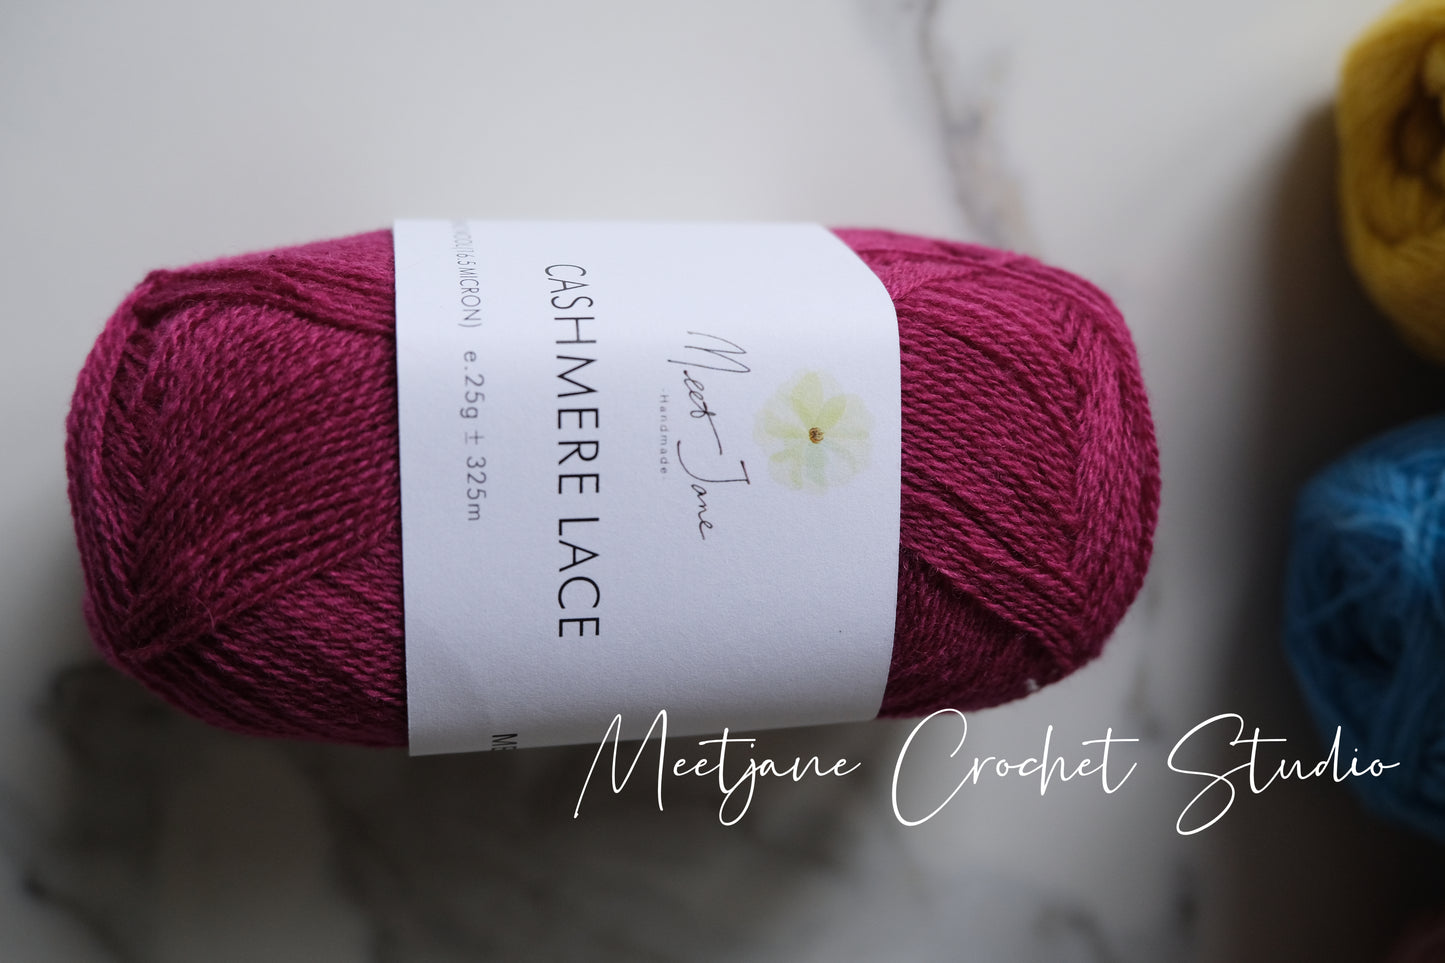 Crochet yarn|cashmere lace|25g|Bright colours